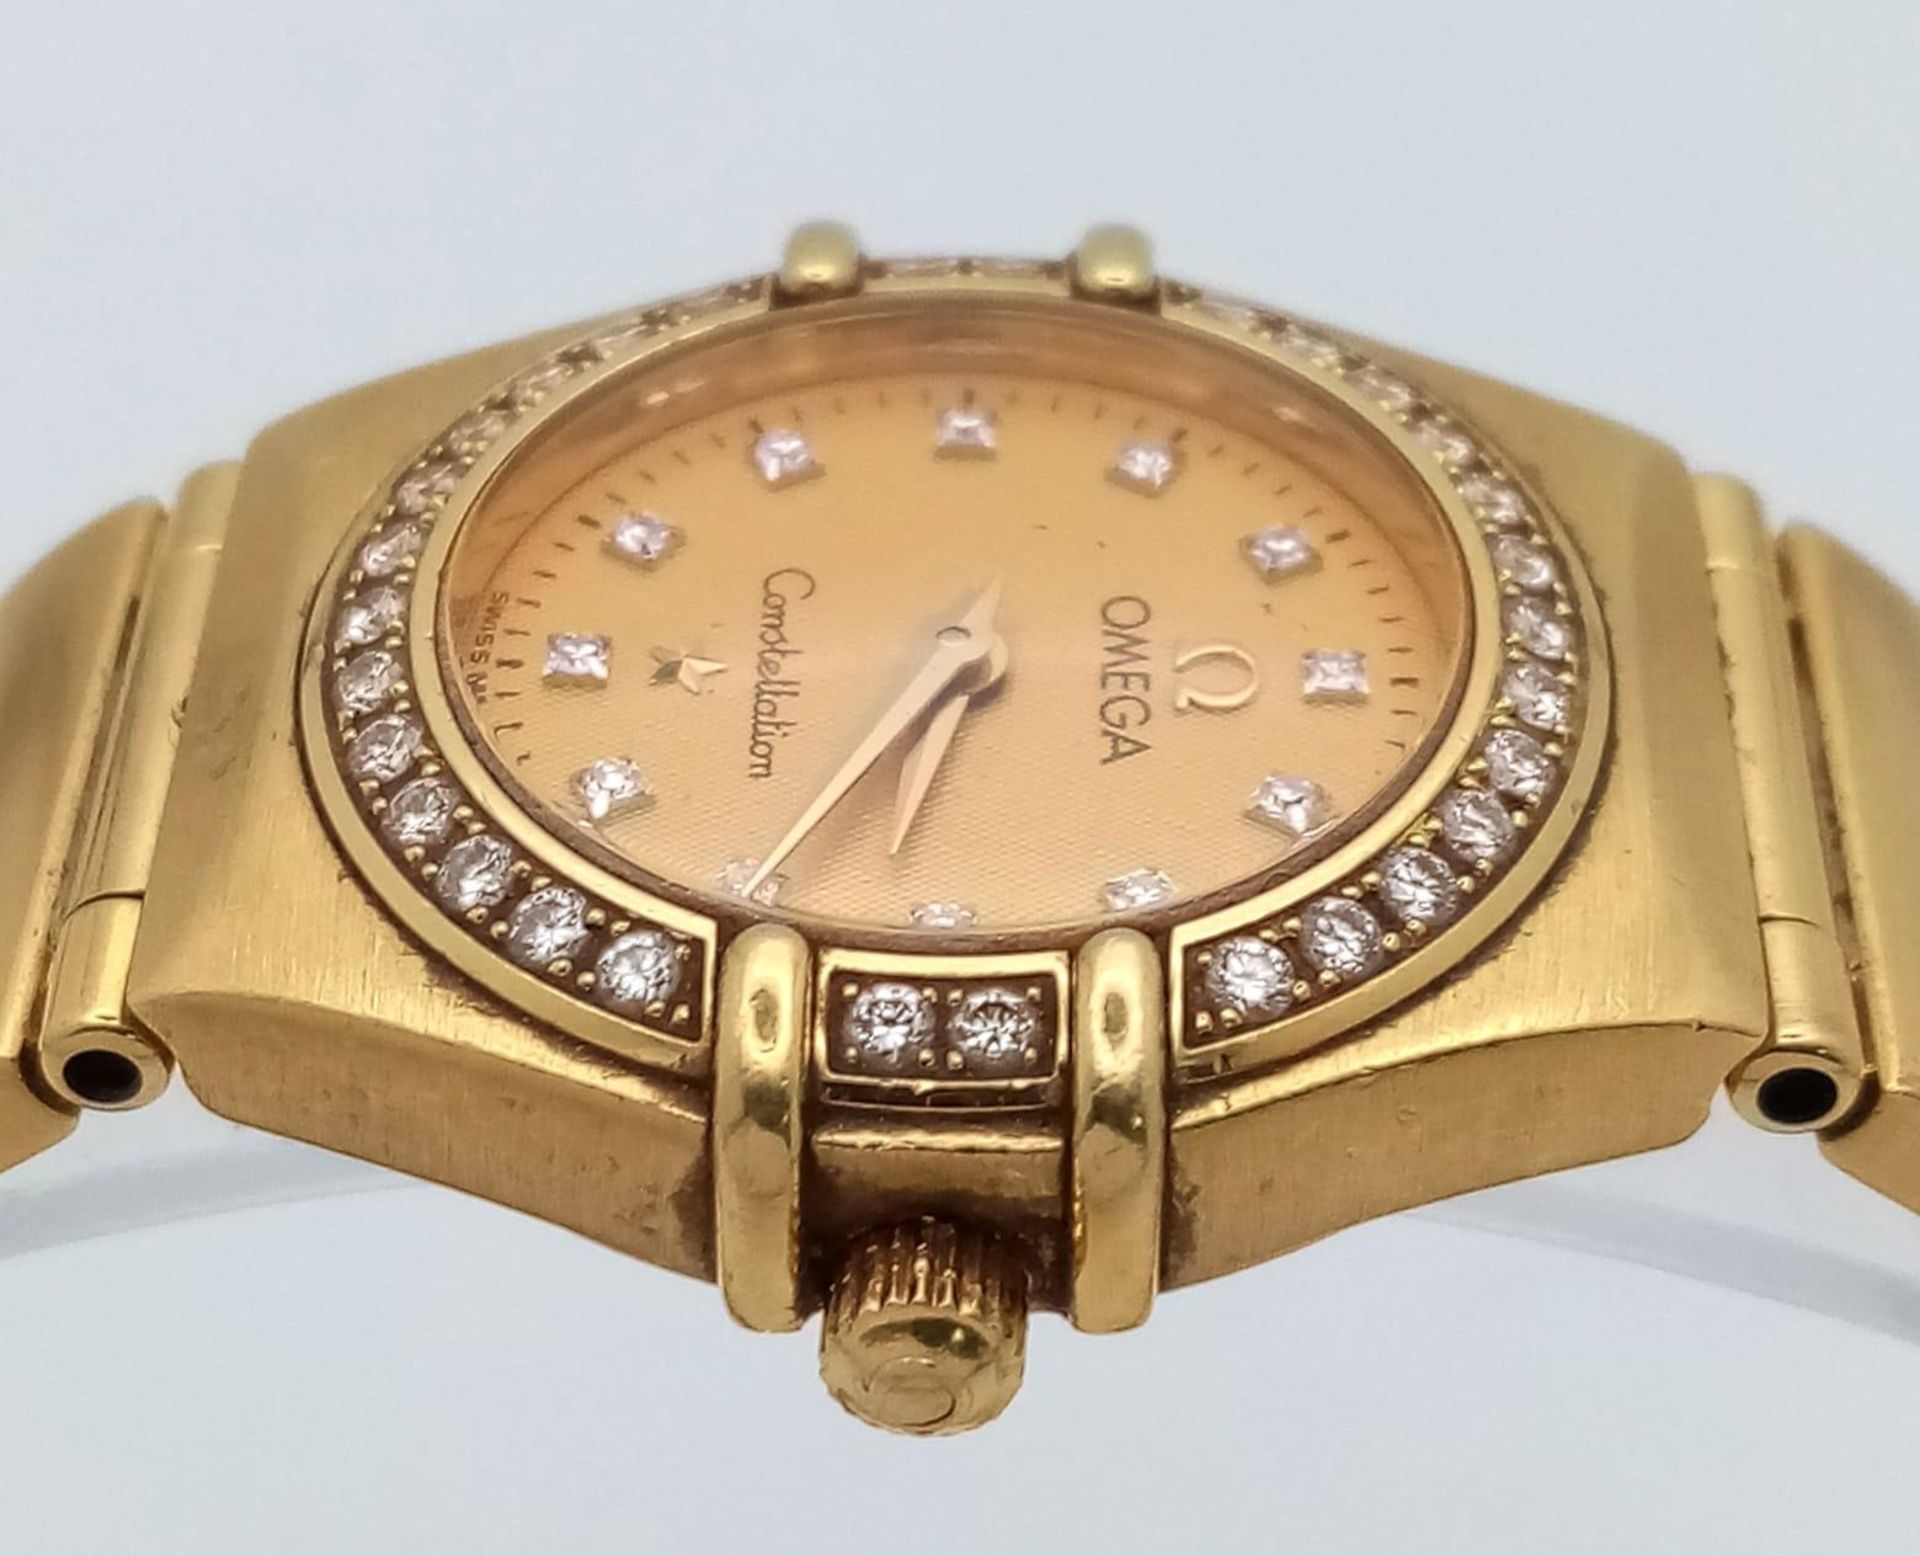 An Omega 18K Yellow Gold Constellation Ladies Watch. 18K gold bracelet and case - 23mm. Gold tone - Image 4 of 8